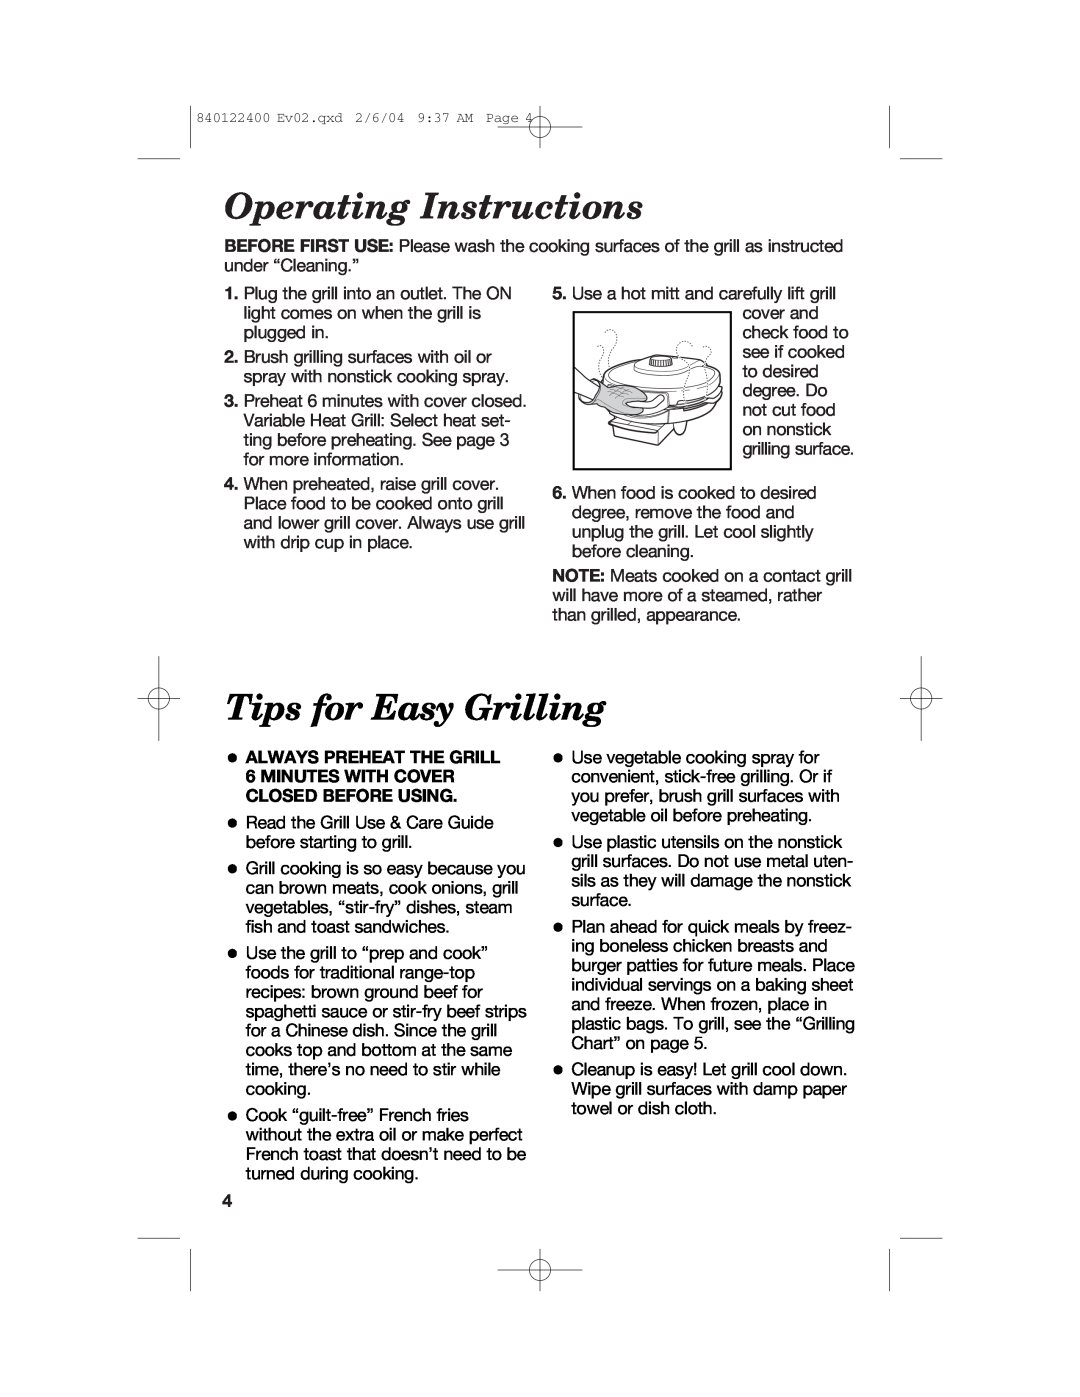 Hamilton Beach 25326C manual Operating Instructions, Tips for Easy Grilling 